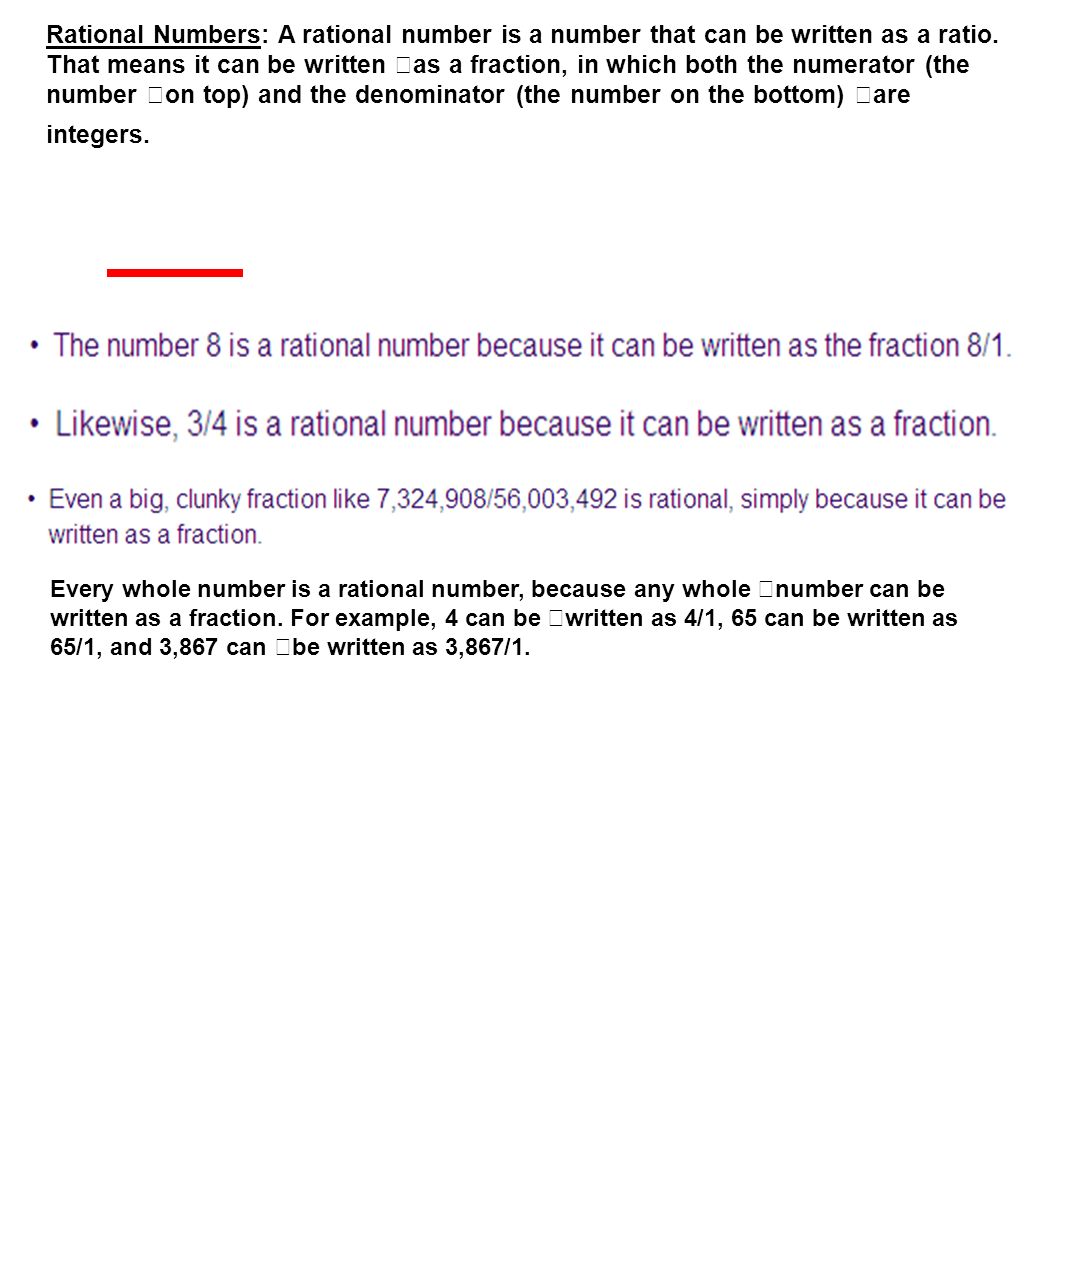 Rational Numbers: A rational number is a number that can be written as a ratio.